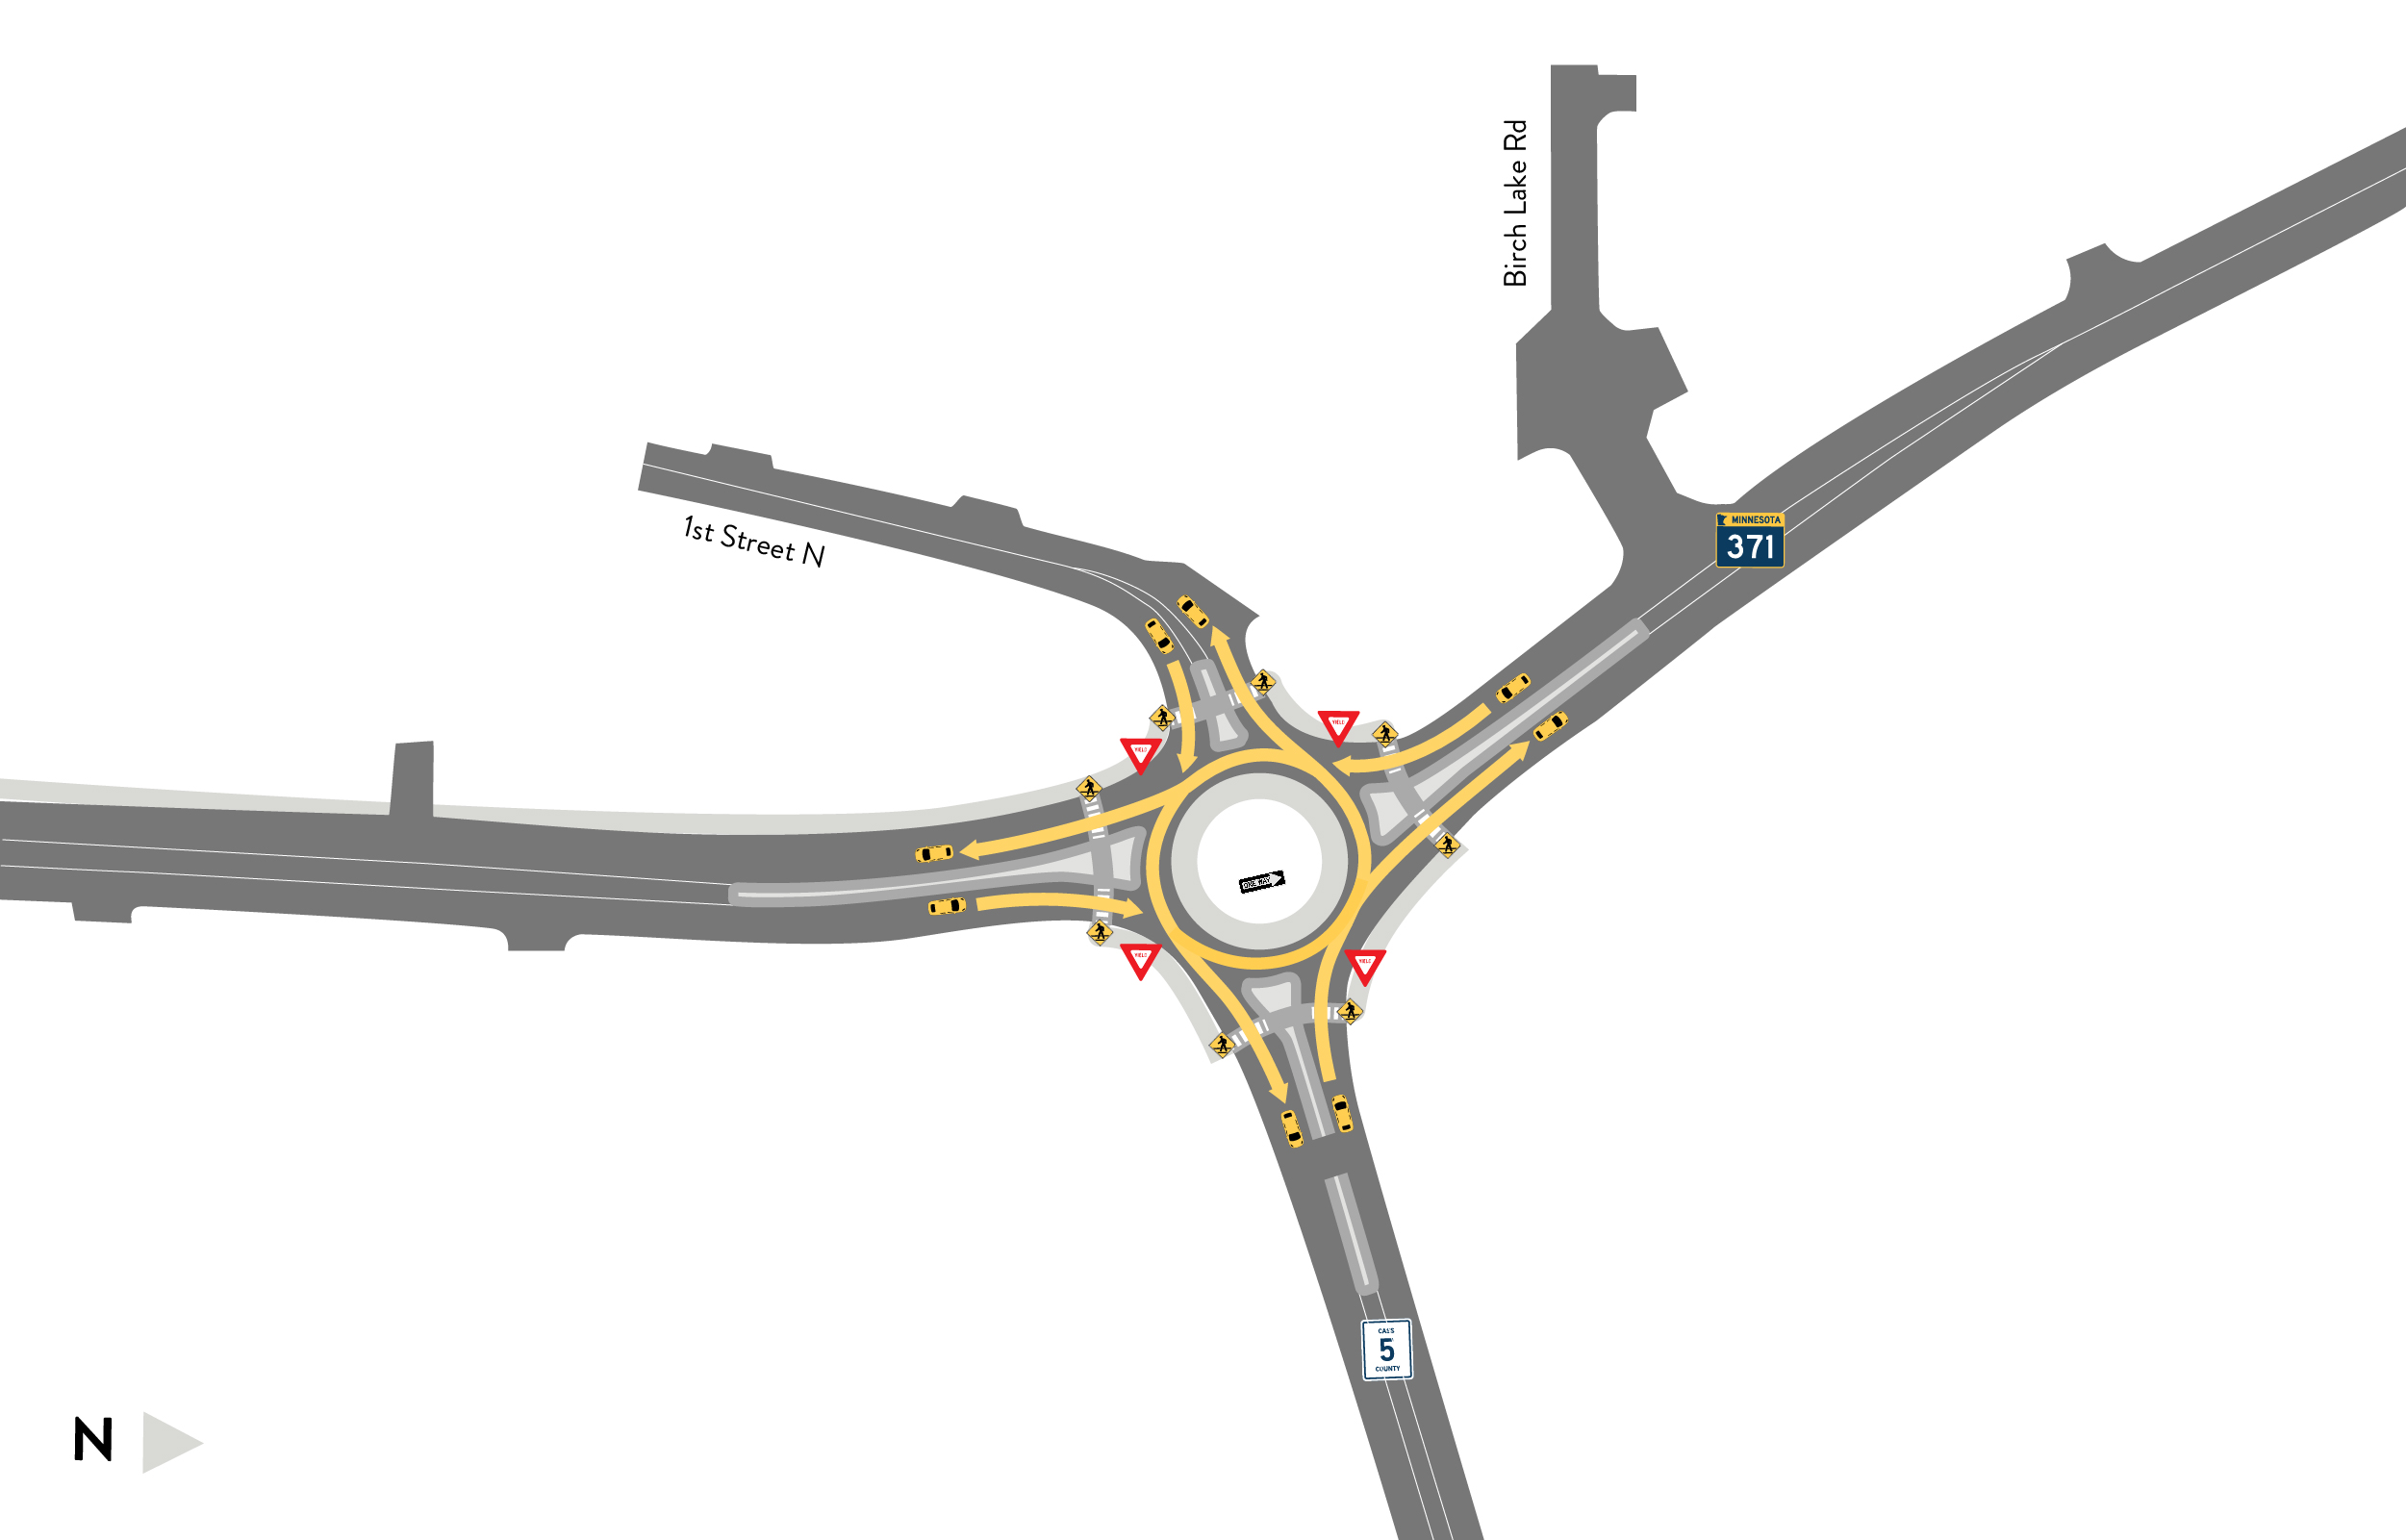 Roundabout intersection design